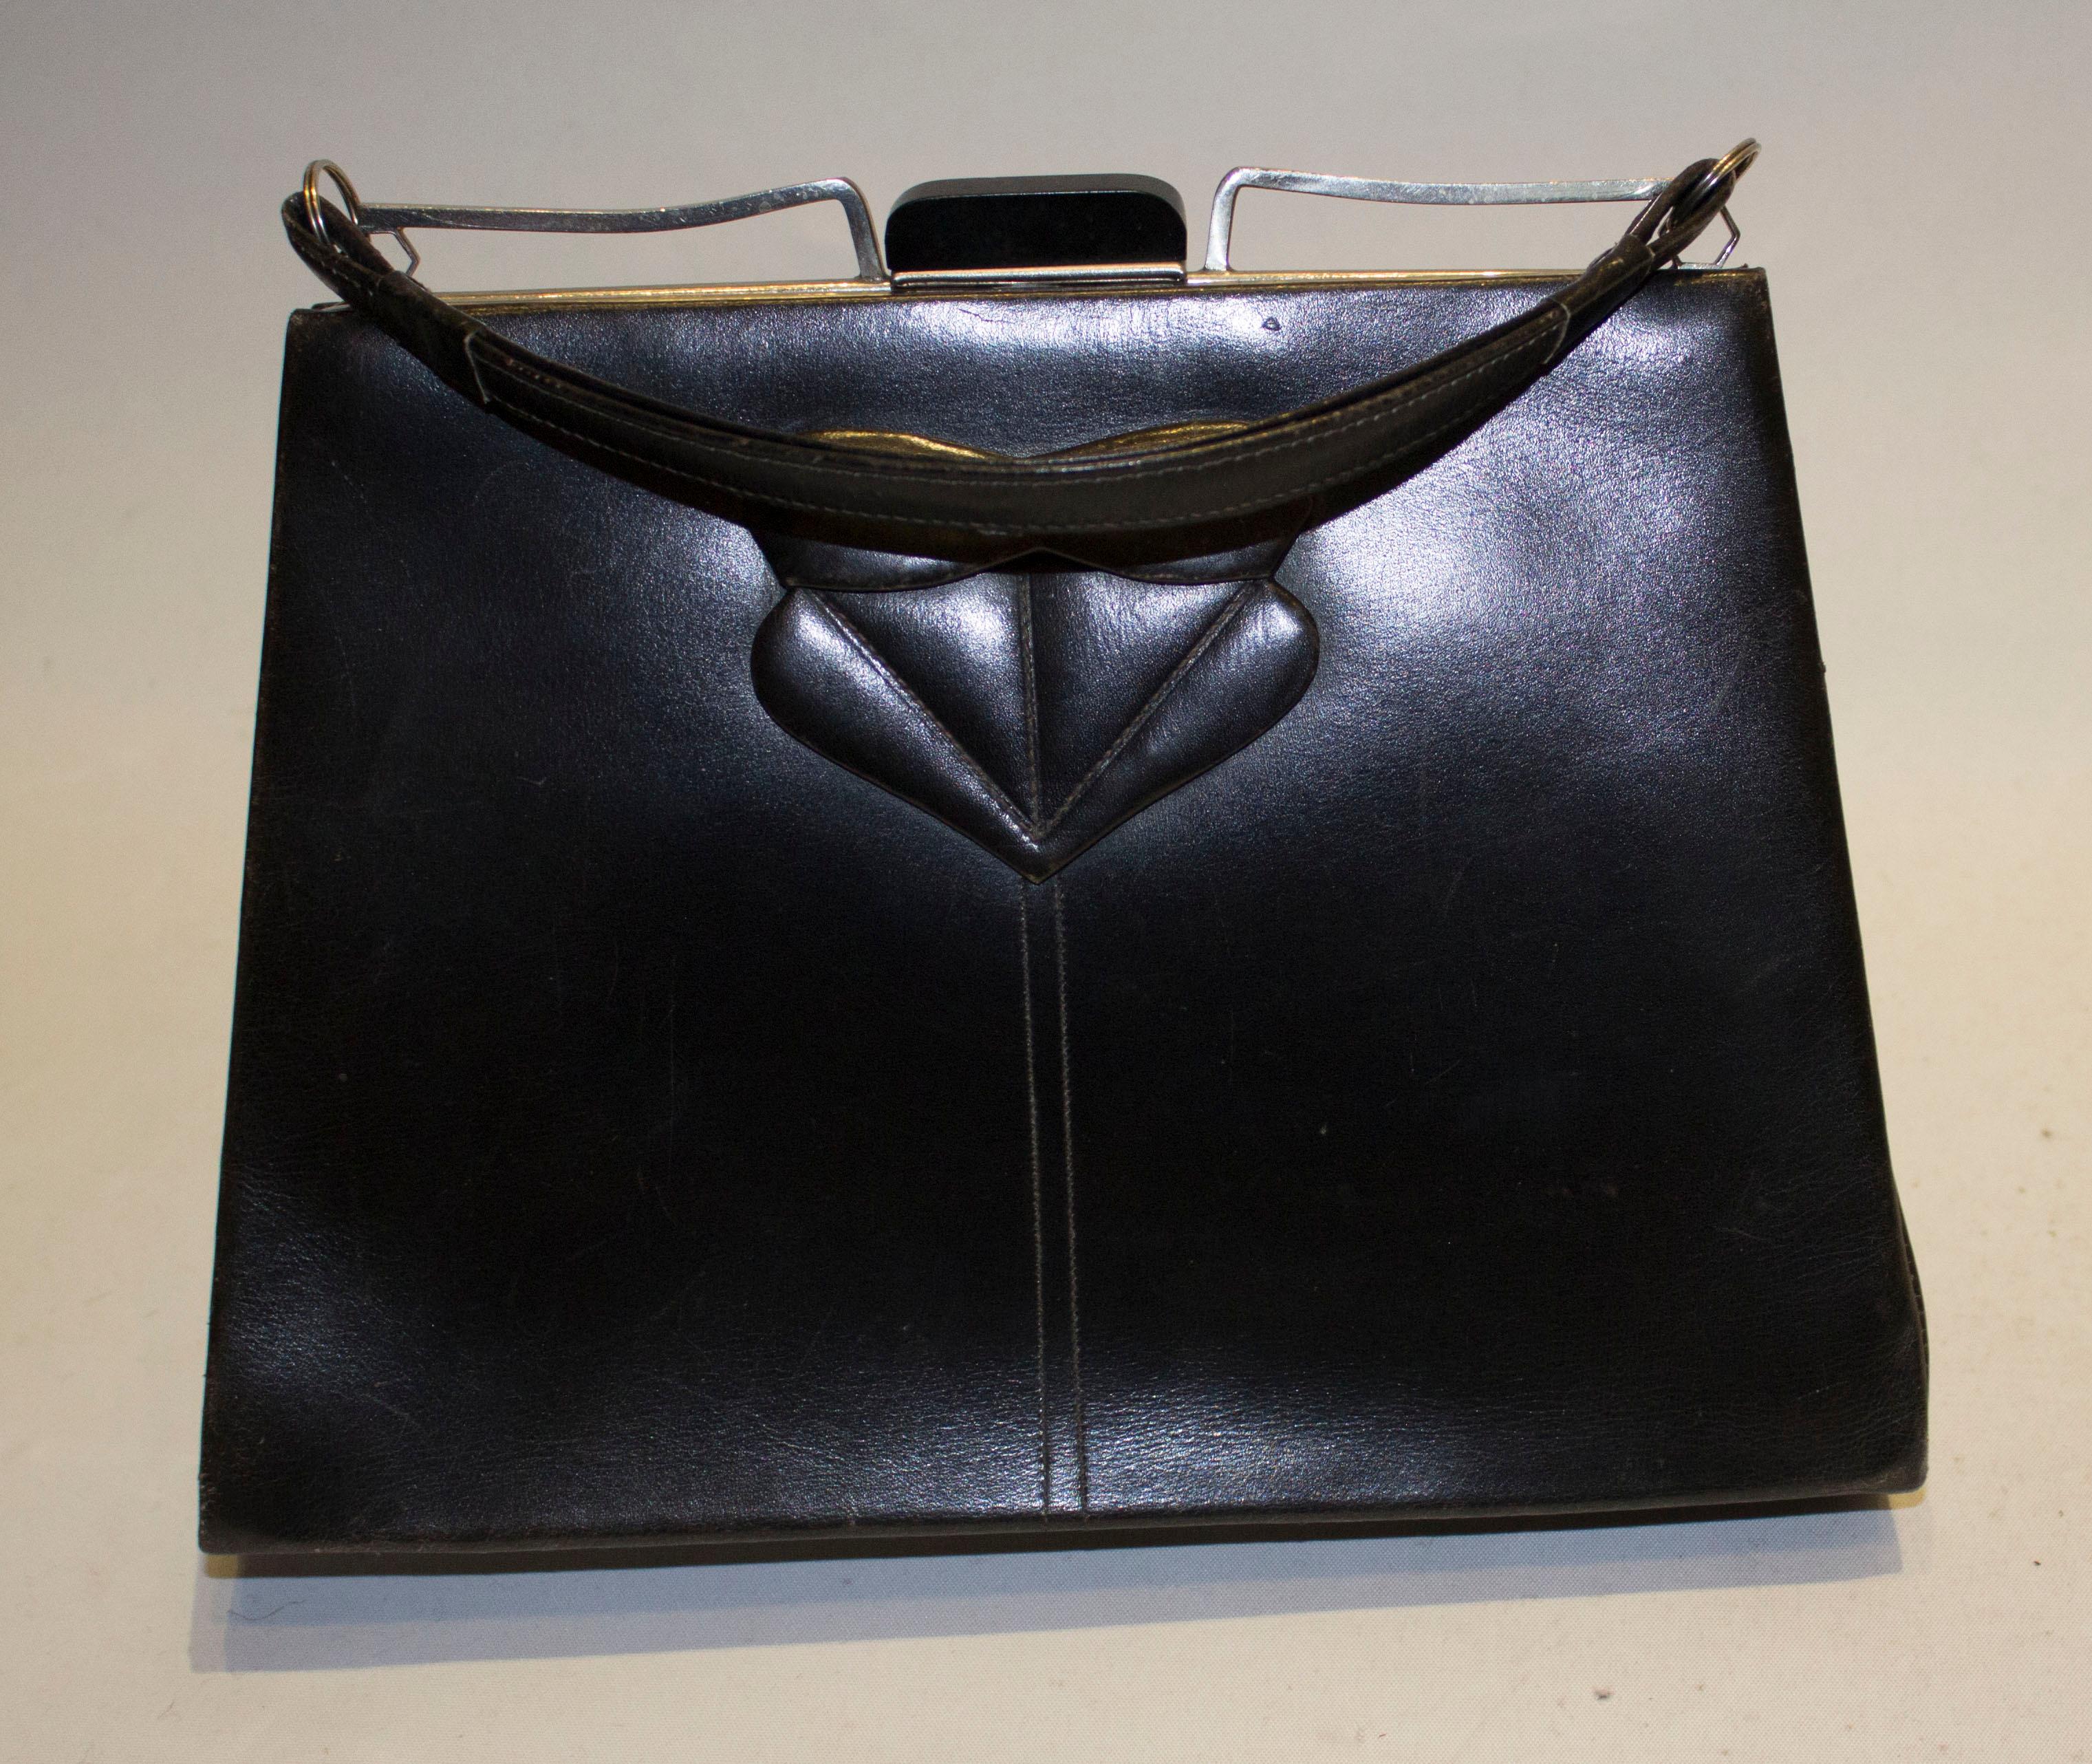 A chic vintage black leather art deco bag. The bag has attractive detail on the front ,and the top clasp. Inside there are two compartments , one with a pouch pocket and one with a purse pocket. The bag has a leather handle and measures width 9 1/2